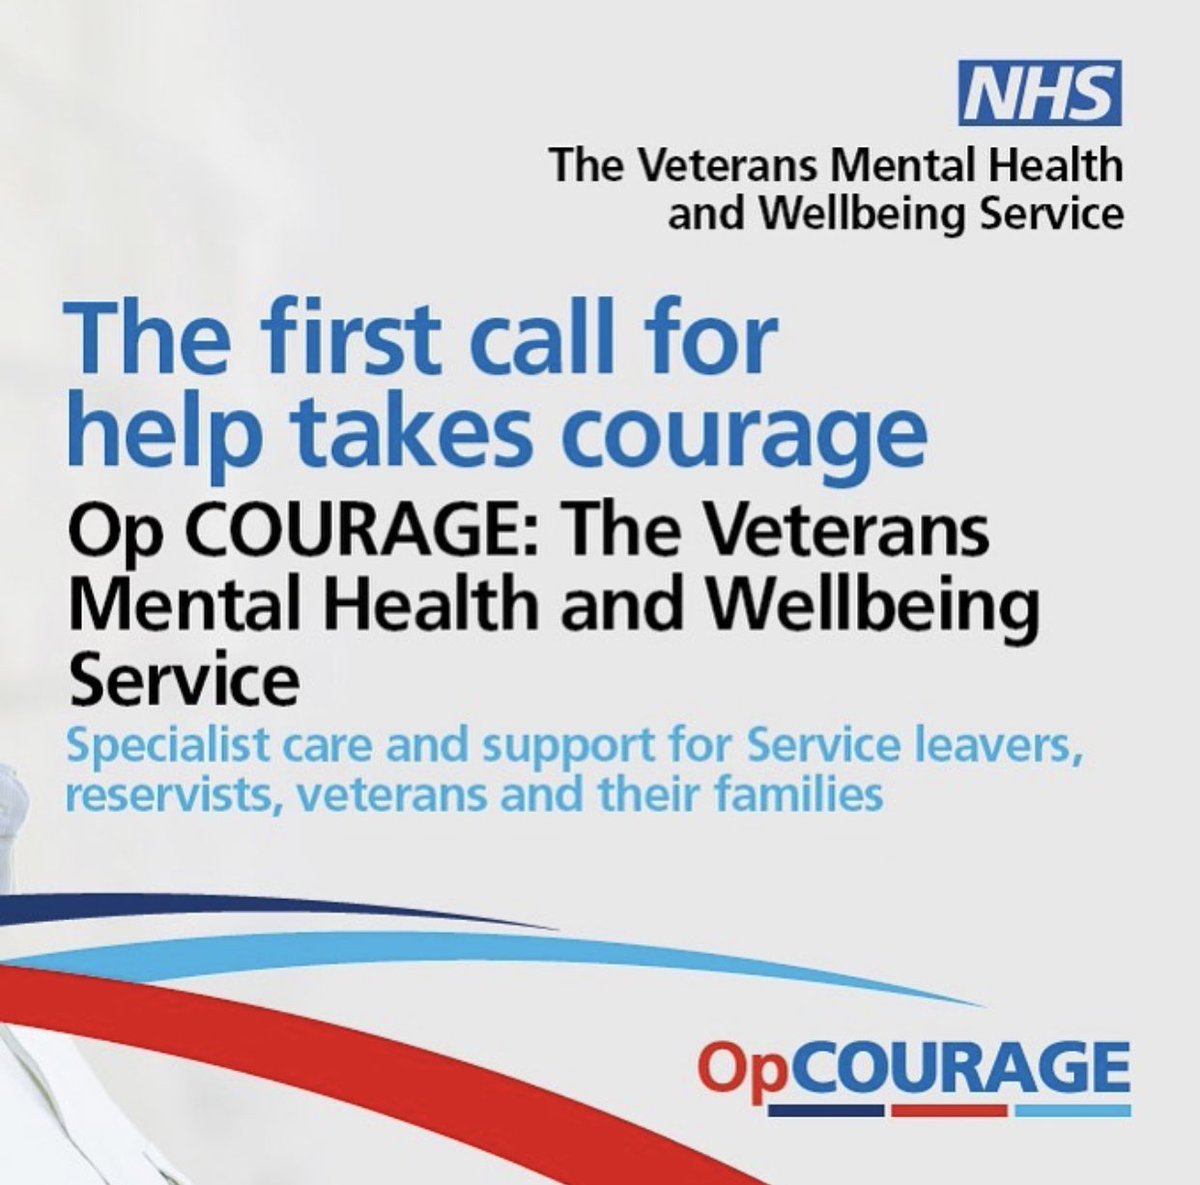 Asking for help takes courage, being open to receive help takes courage. Having a mental illness is not a weakness, this is a battle you need not face alone. 

Extremely proud to be part of a team who has helped make this happen.

#veteranmentalhealth #OpCourage @JohnnyMercerUK